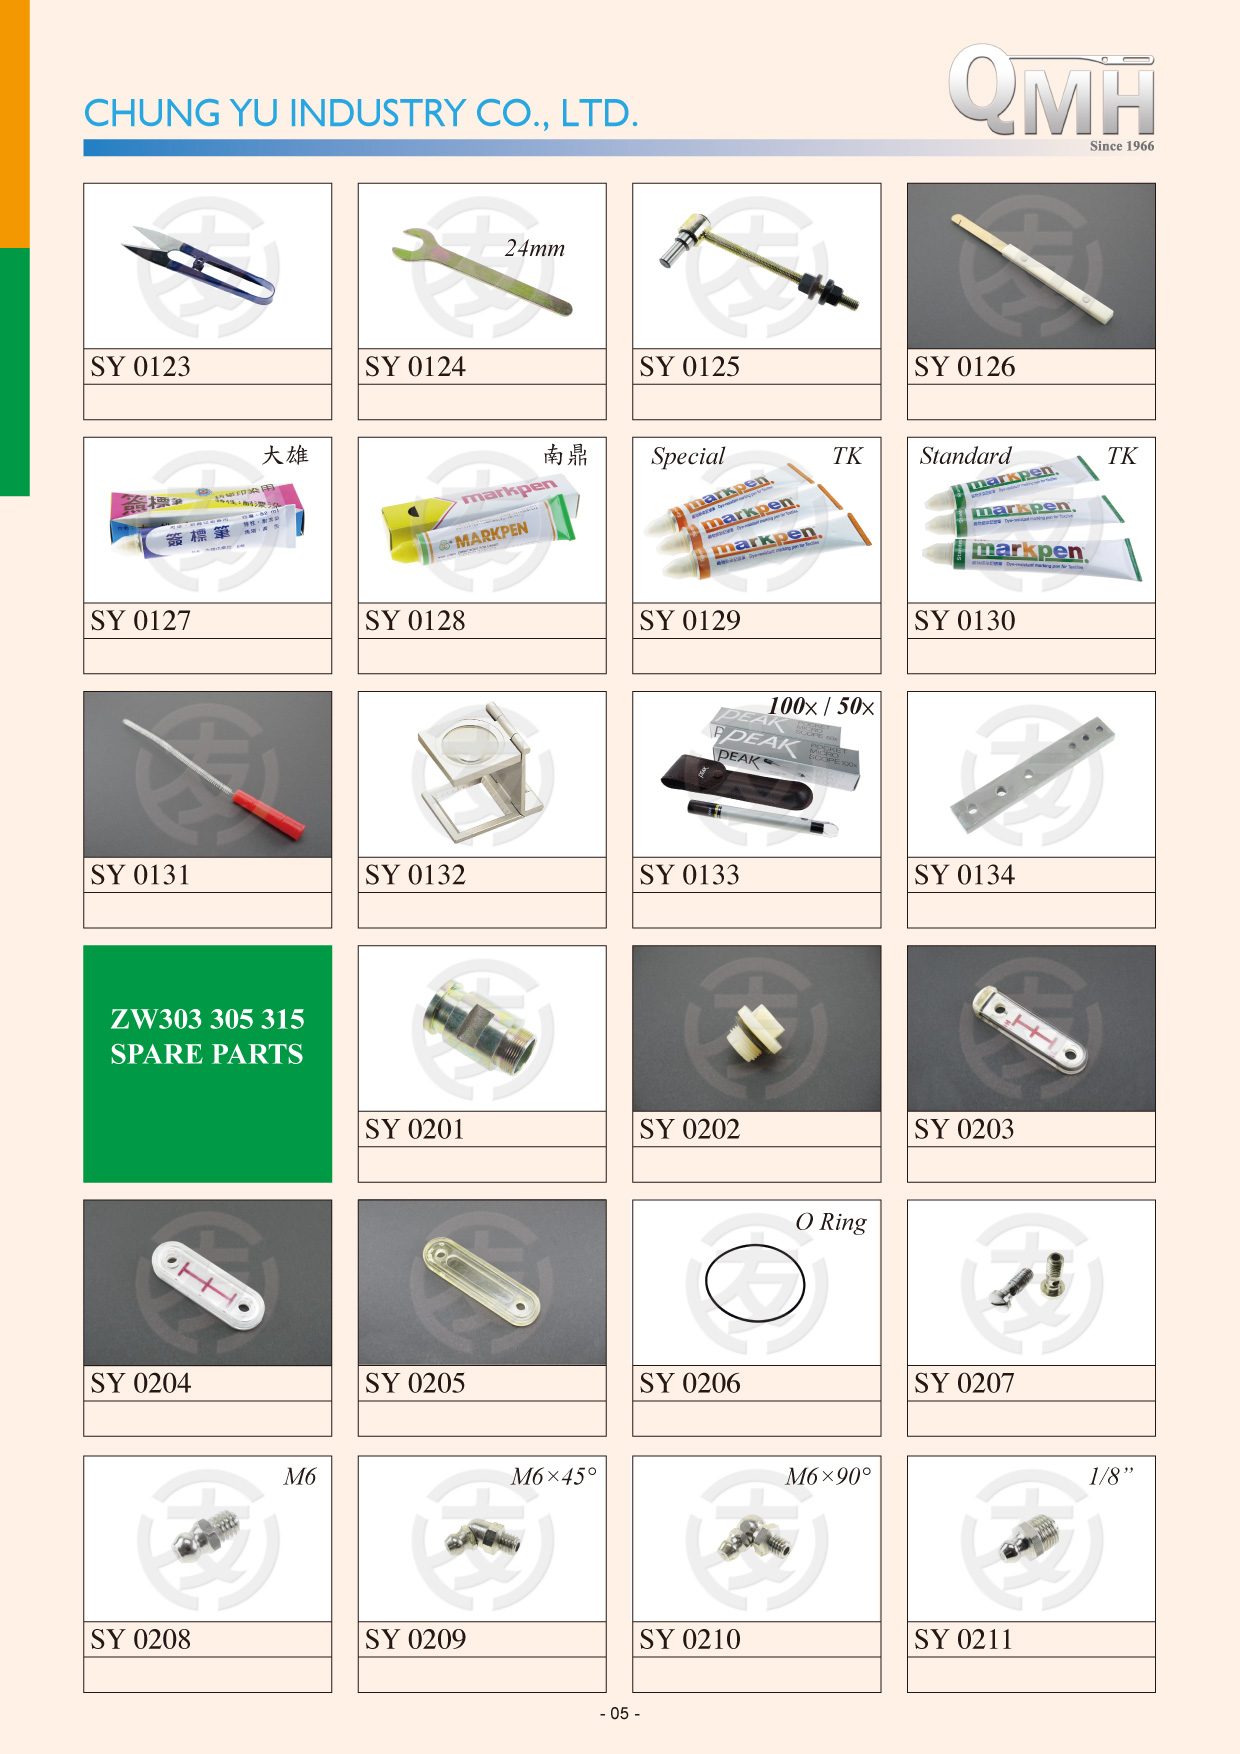 ZW 305 315 Spare Parts